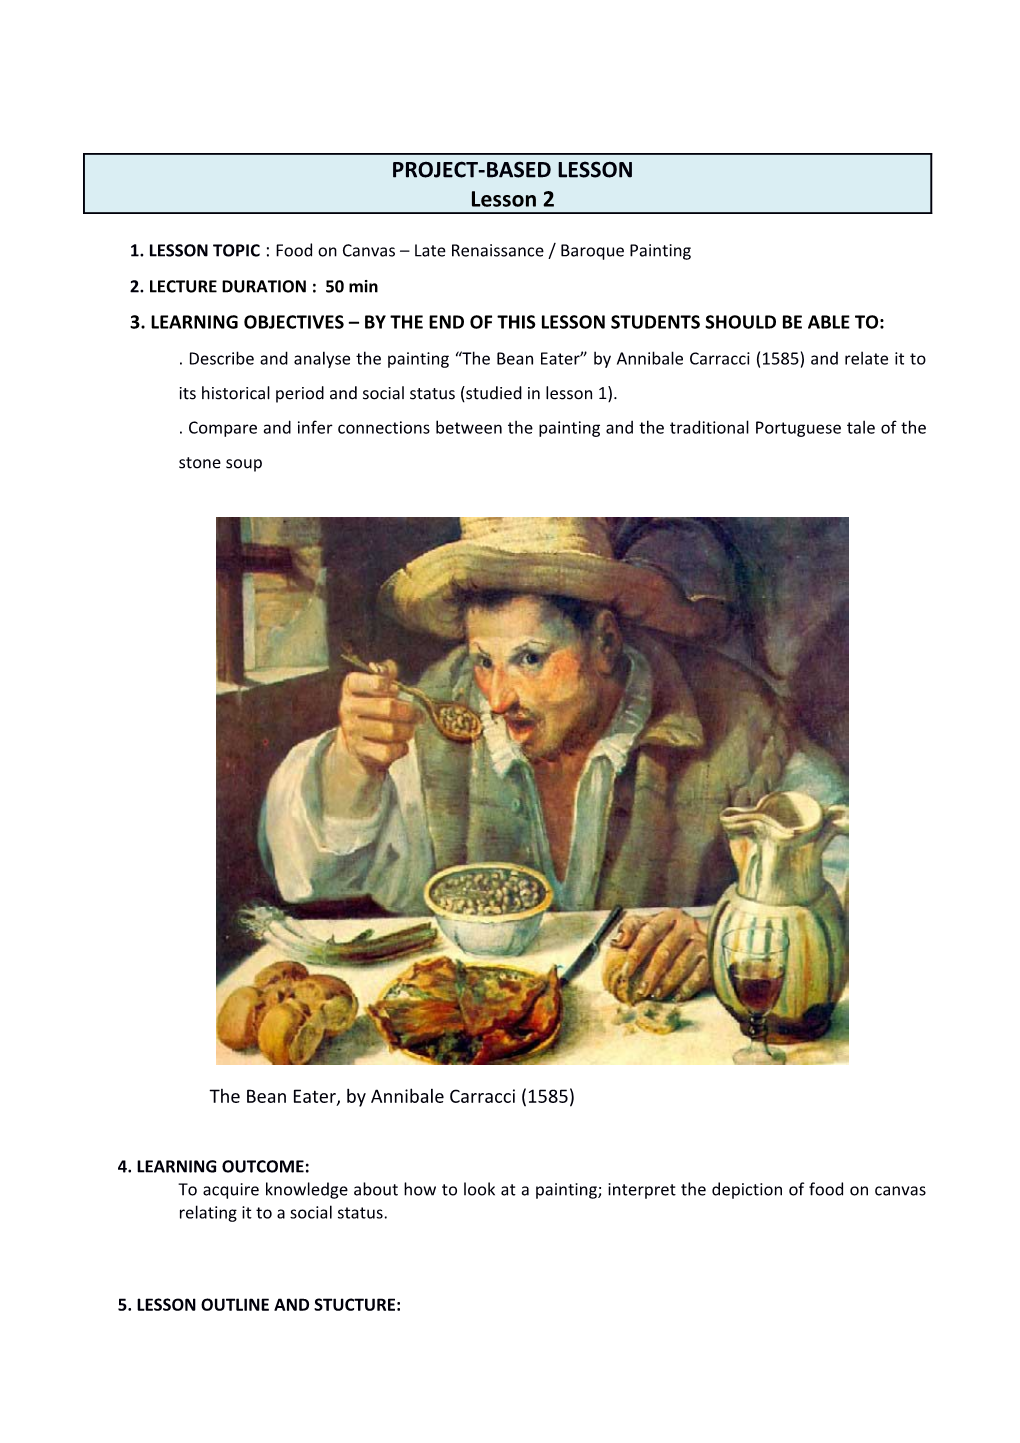 1. LESSON TOPIC :Food on Canvas Late Renaissance / Baroque Painting